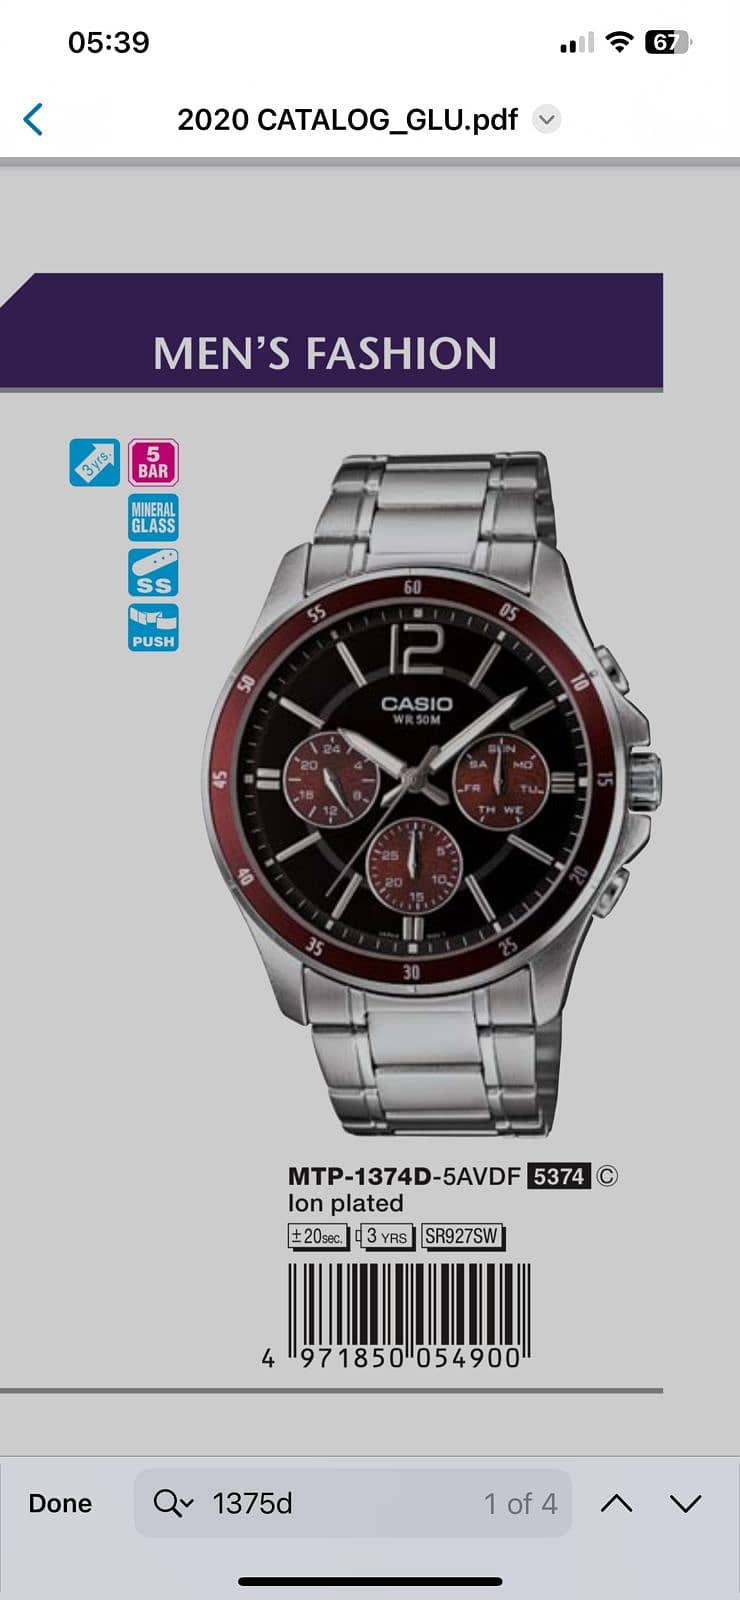 Casio watches on discounted prices 1